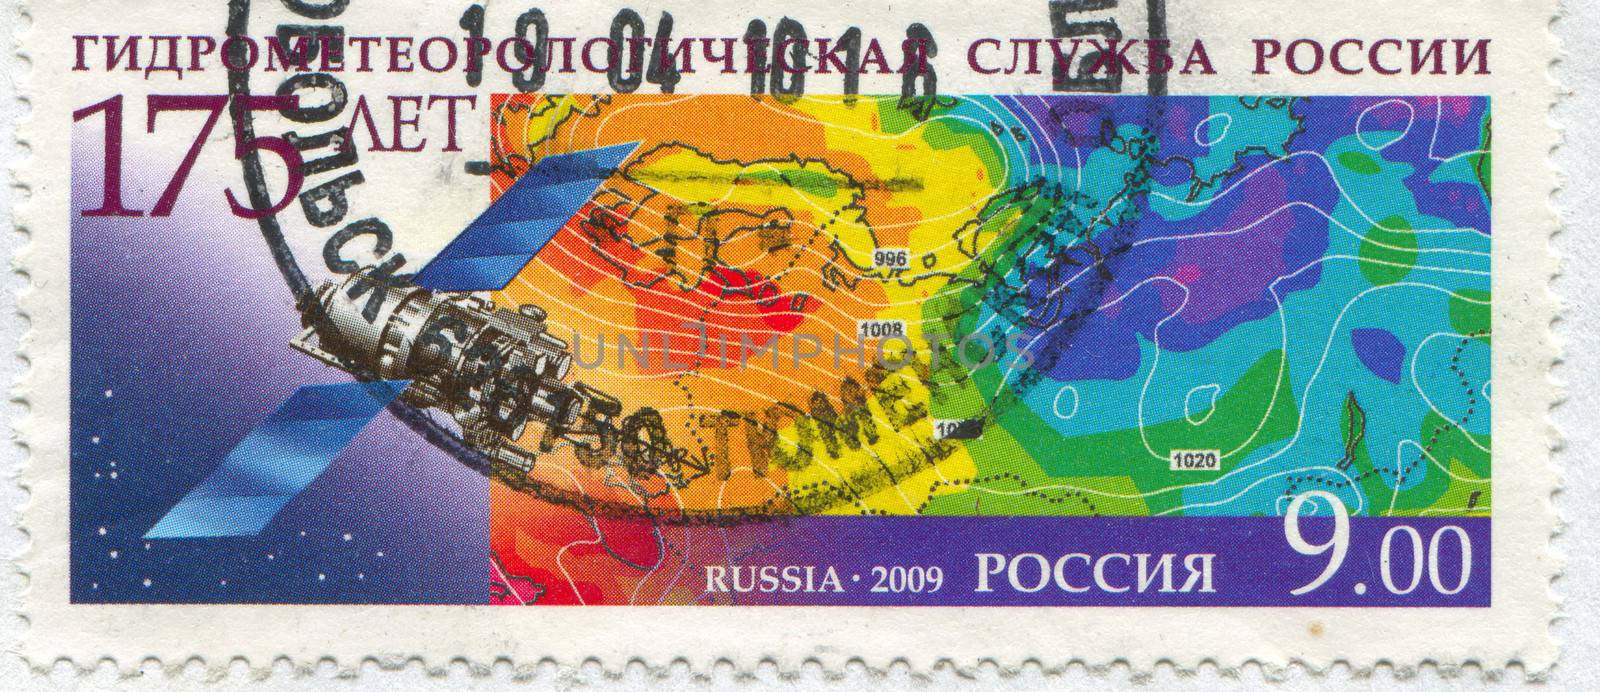 RUSSIA - CIRCA 2009: stamp printed by Russia, shows Satellite and Hydrometeorologic Map, circa 2009